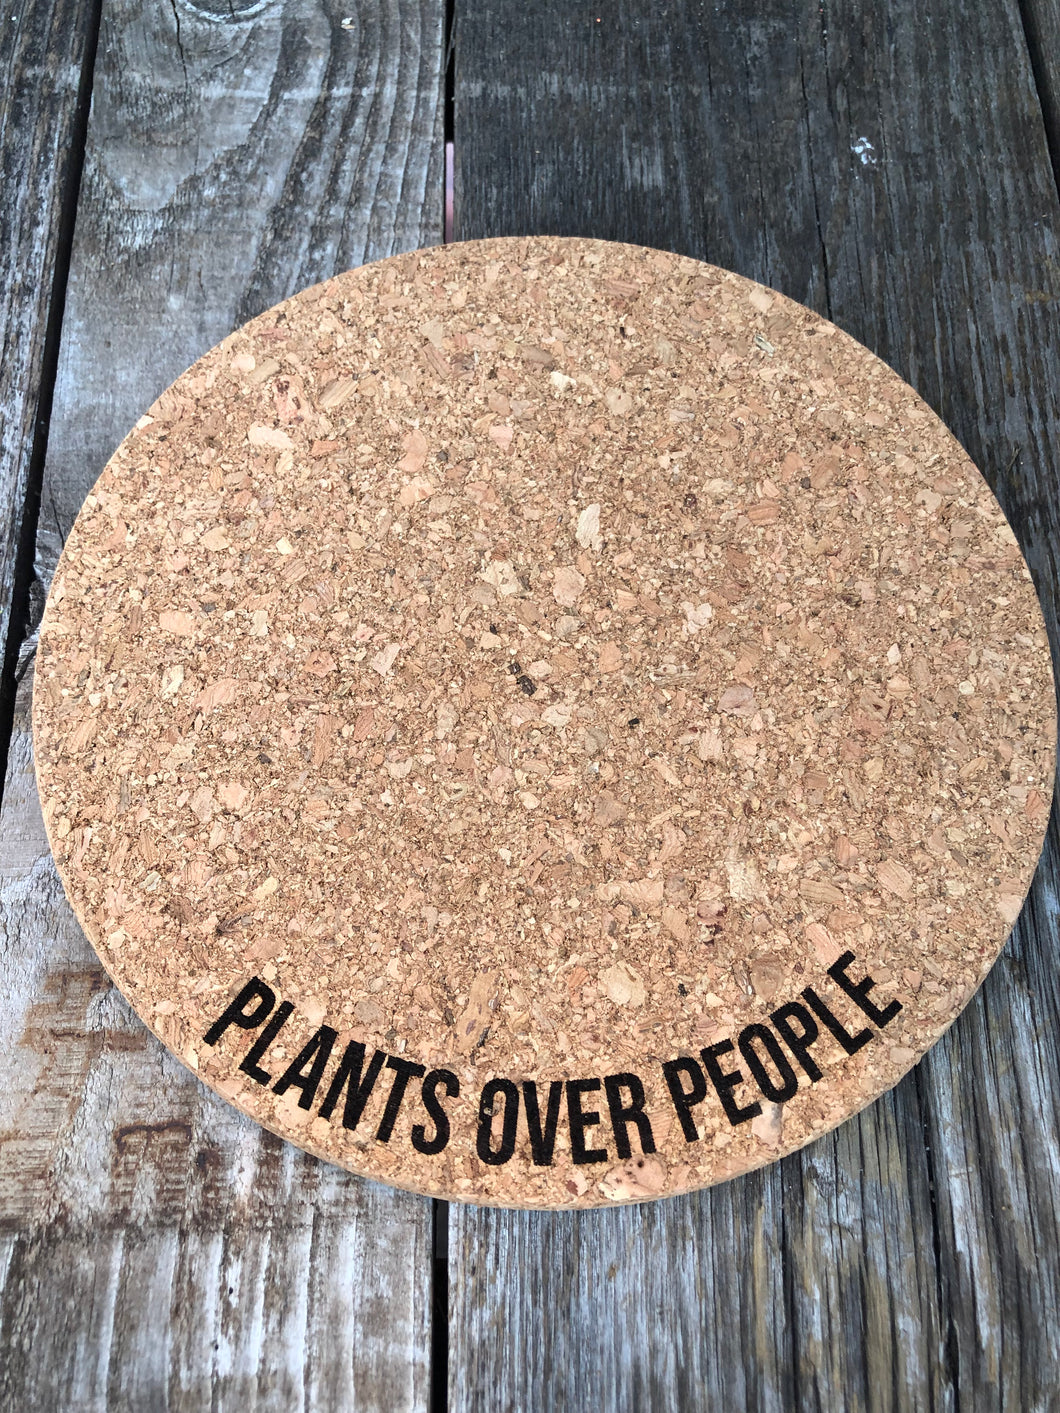 Plants over People Cork Plant Mat - Engraved Cork Round - Cork Bottom - No Plastic or Rubber - All Natural Material